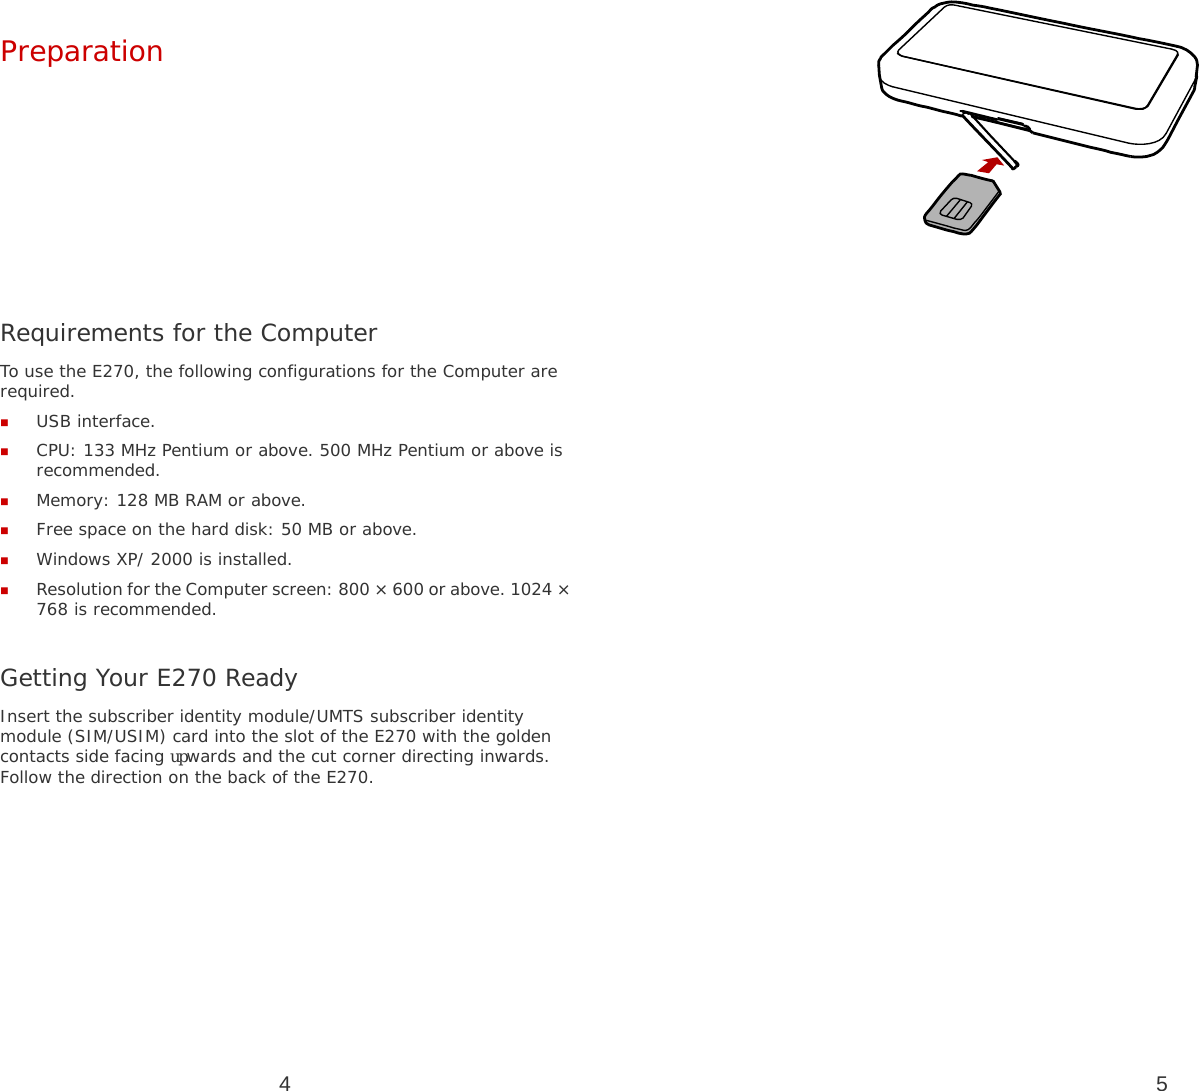 4 Preparation         Requirements for the Computer To use the E270, the following configurations for the Computer are required.  USB interface.  CPU: 133 MHz Pentium or above. 500 MHz Pentium or above is recommended.  Memory: 128 MB RAM or above.  Free space on the hard disk: 50 MB or above.  Windows XP/ 2000 is installed.  Resolution for the Computer screen: 800 × 600 or above. 1024 × 768 is recommended.  Getting Your E270 Ready Insert the subscriber identity module/UMTS subscriber identity module (SIM/USIM) card into the slot of the E270 with the golden contacts side facing upwards and the cut corner directing inwards. Follow the direction on the back of the E270. 5  